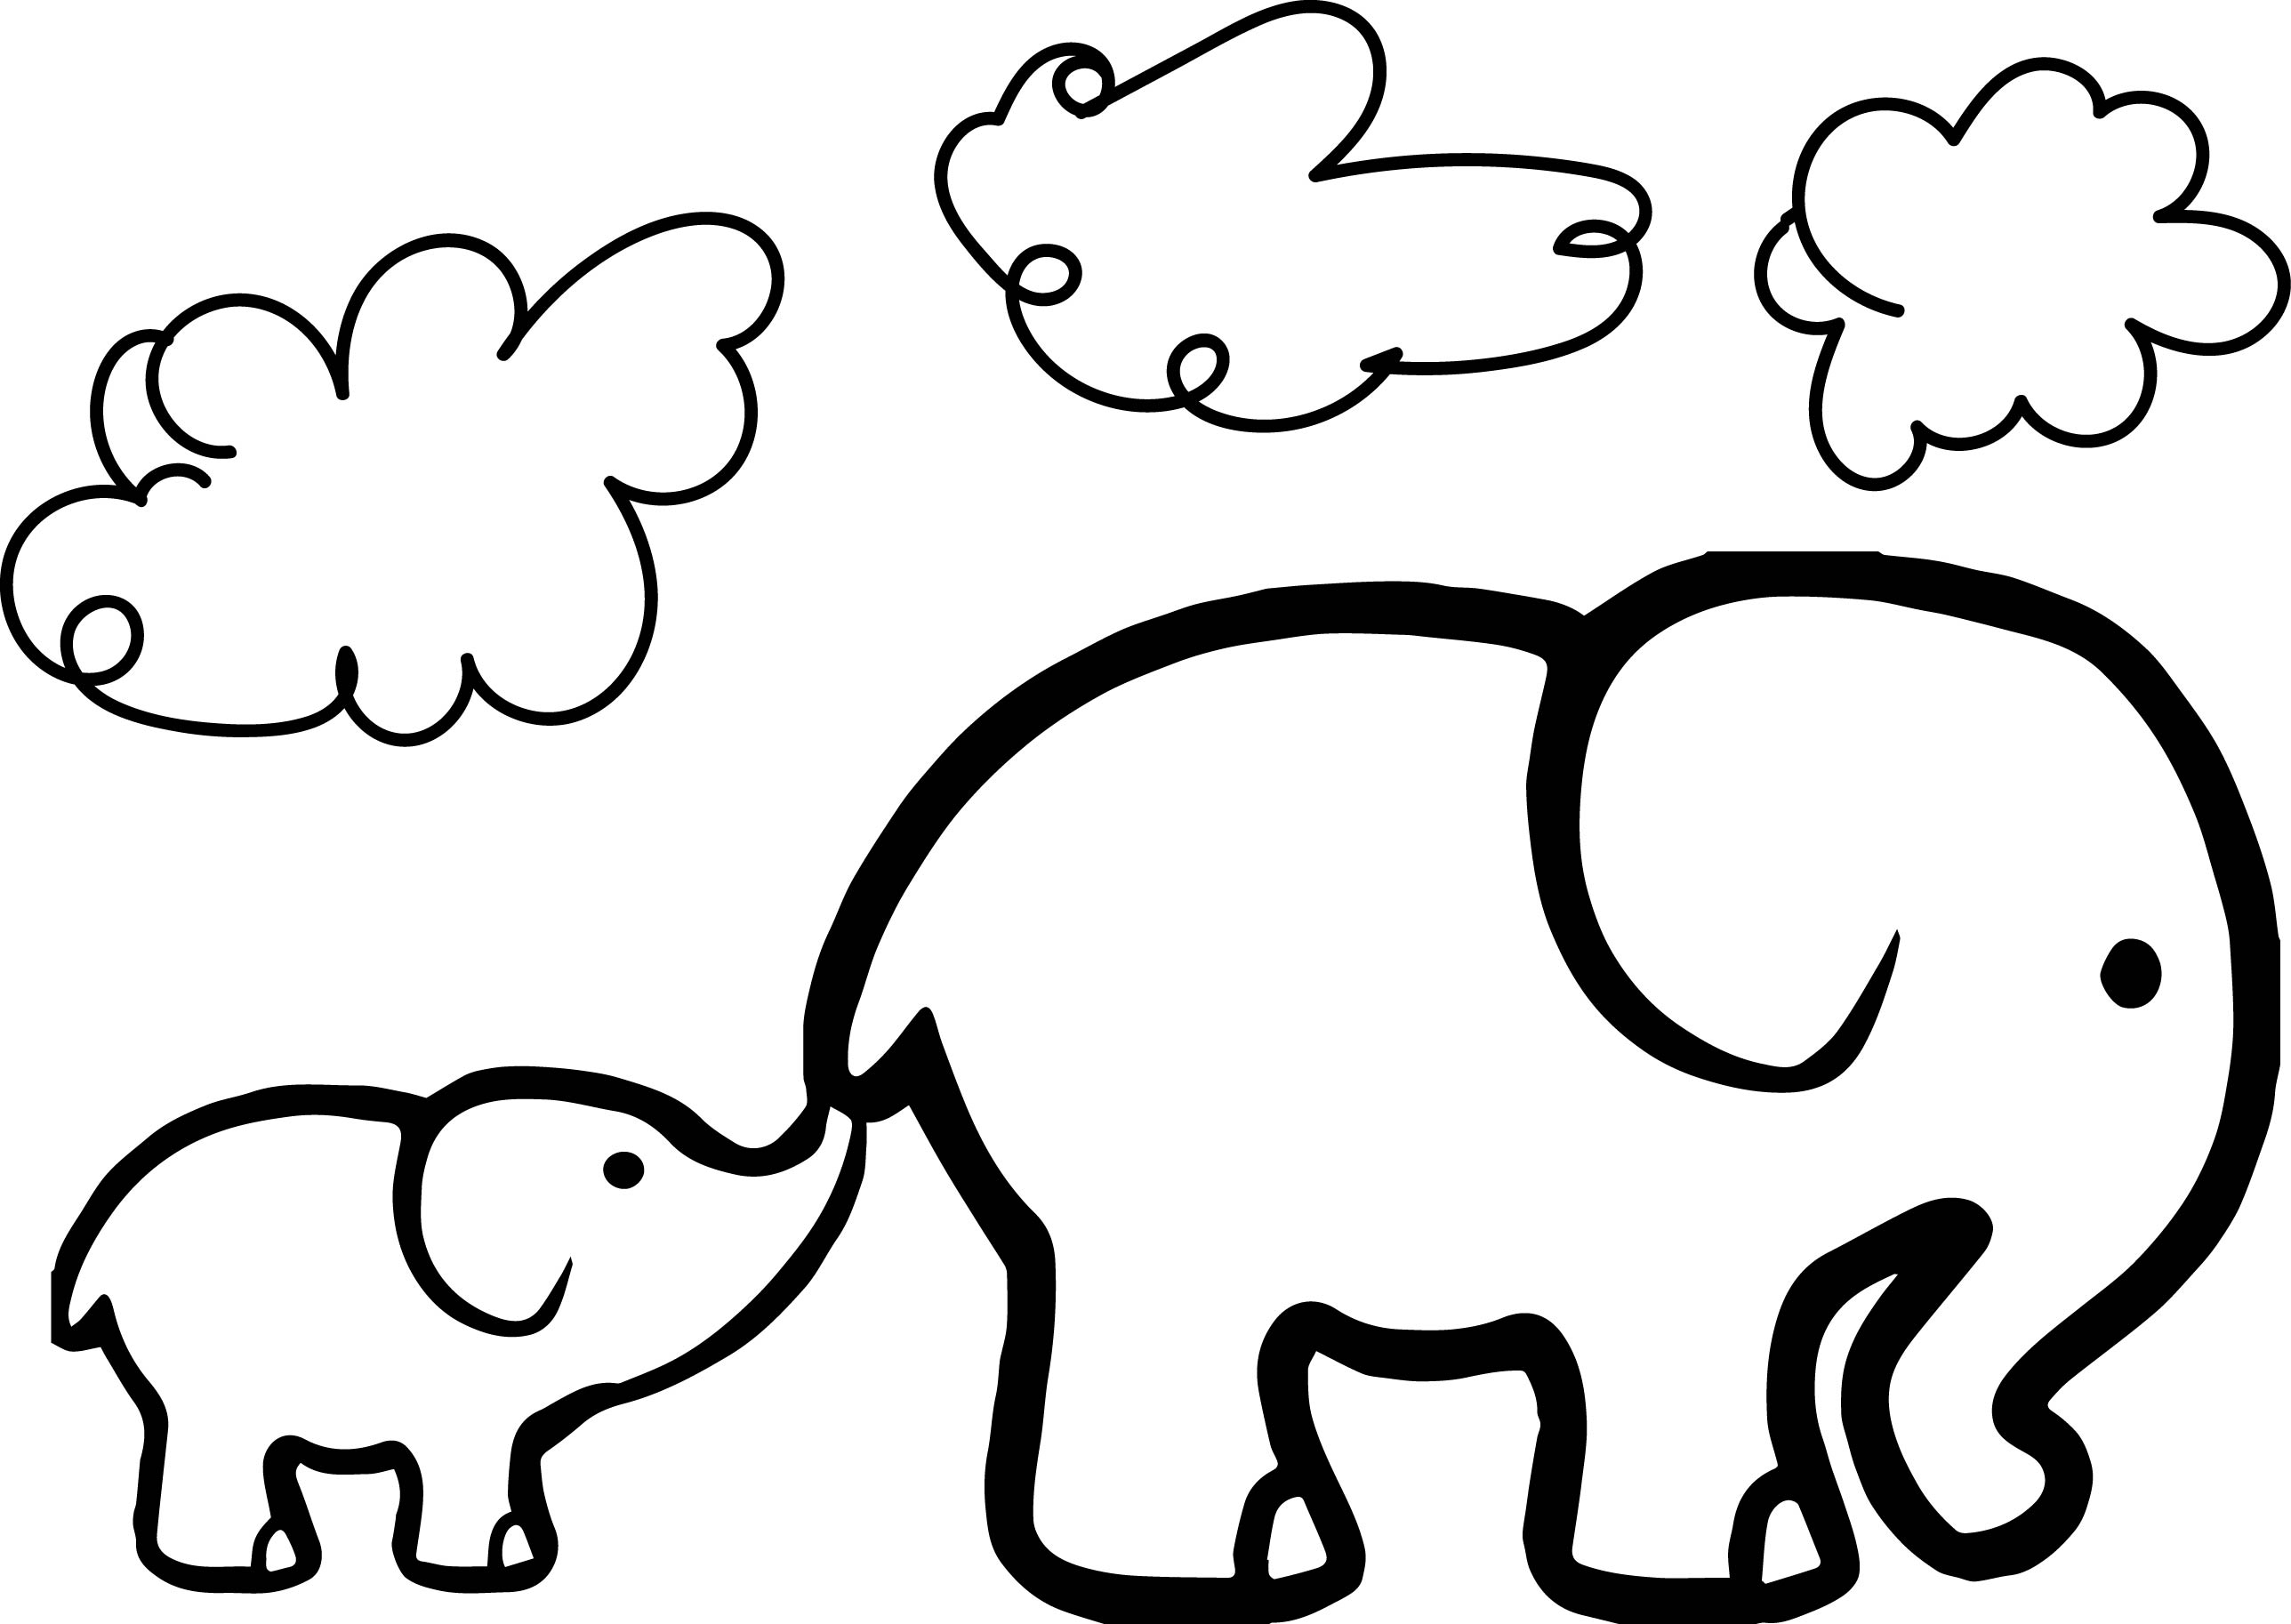 free-printable-elephant-coloring-pages-easy-elephant-pictures-to-color